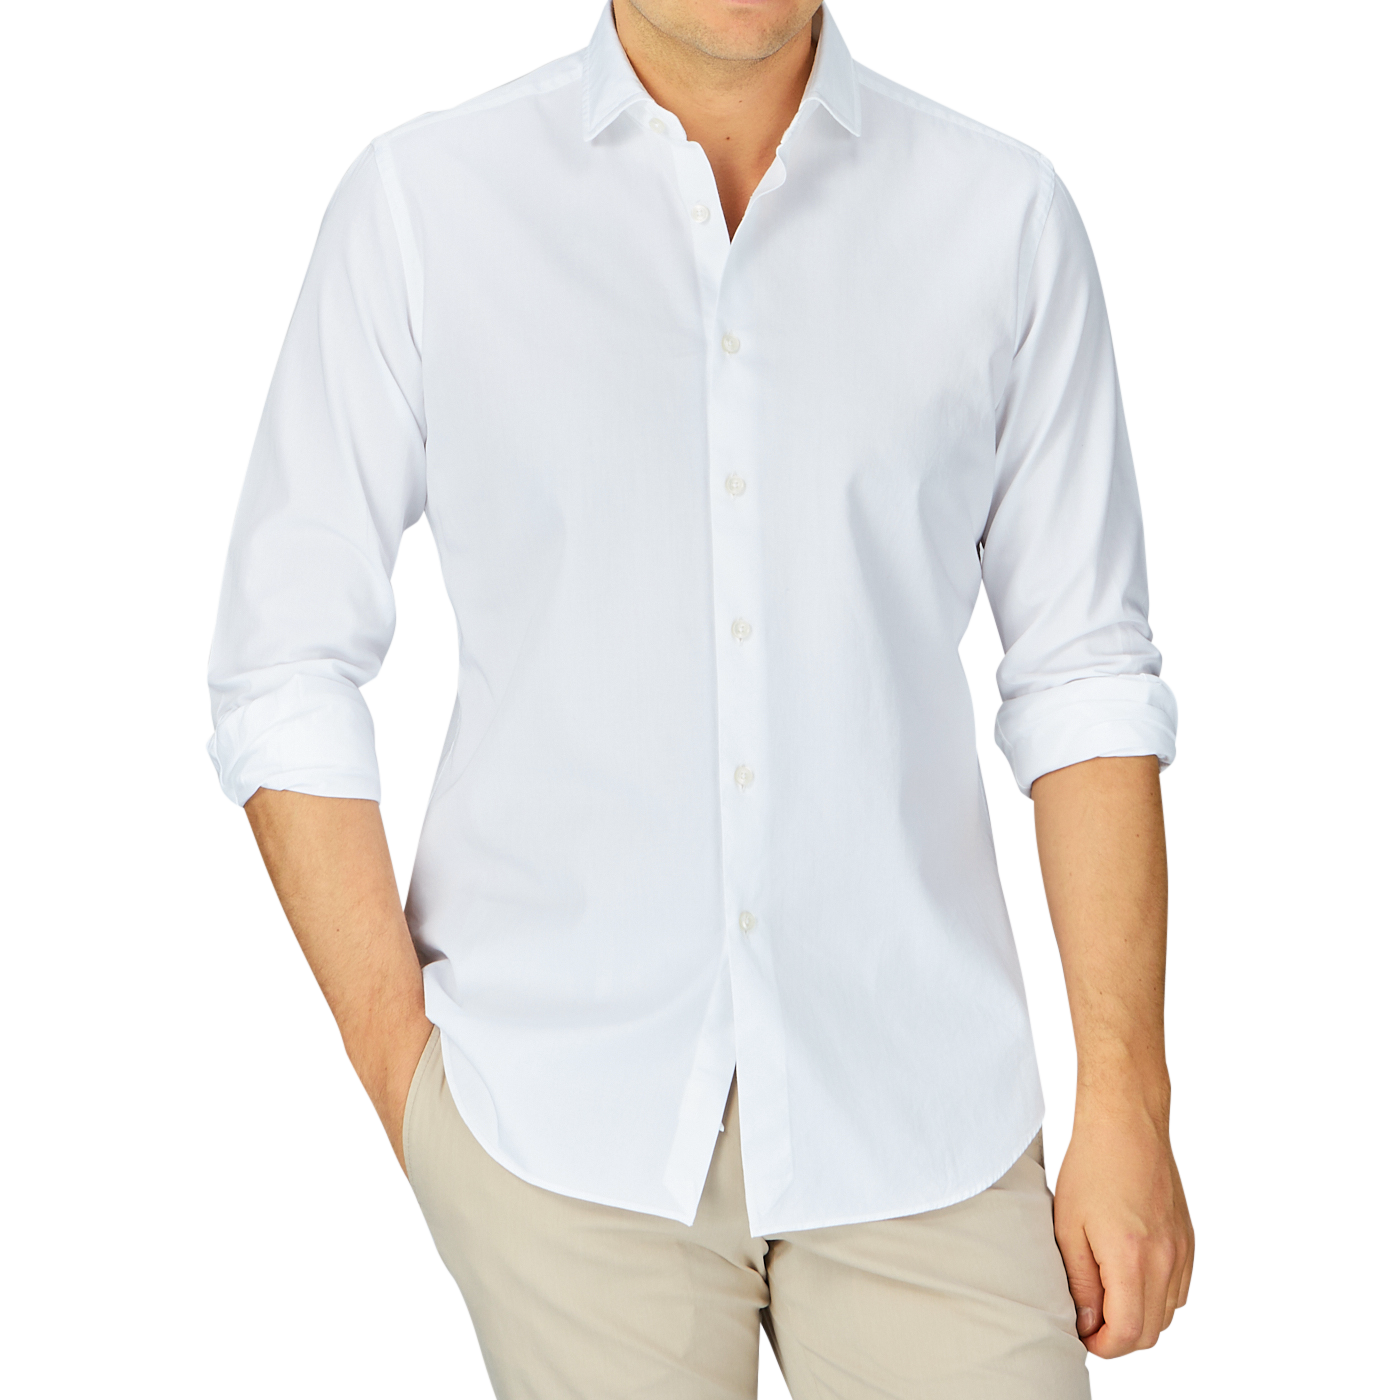 Man wearing a Xacus White Cotton Twill Tailor Fit Shirt and beige pants.